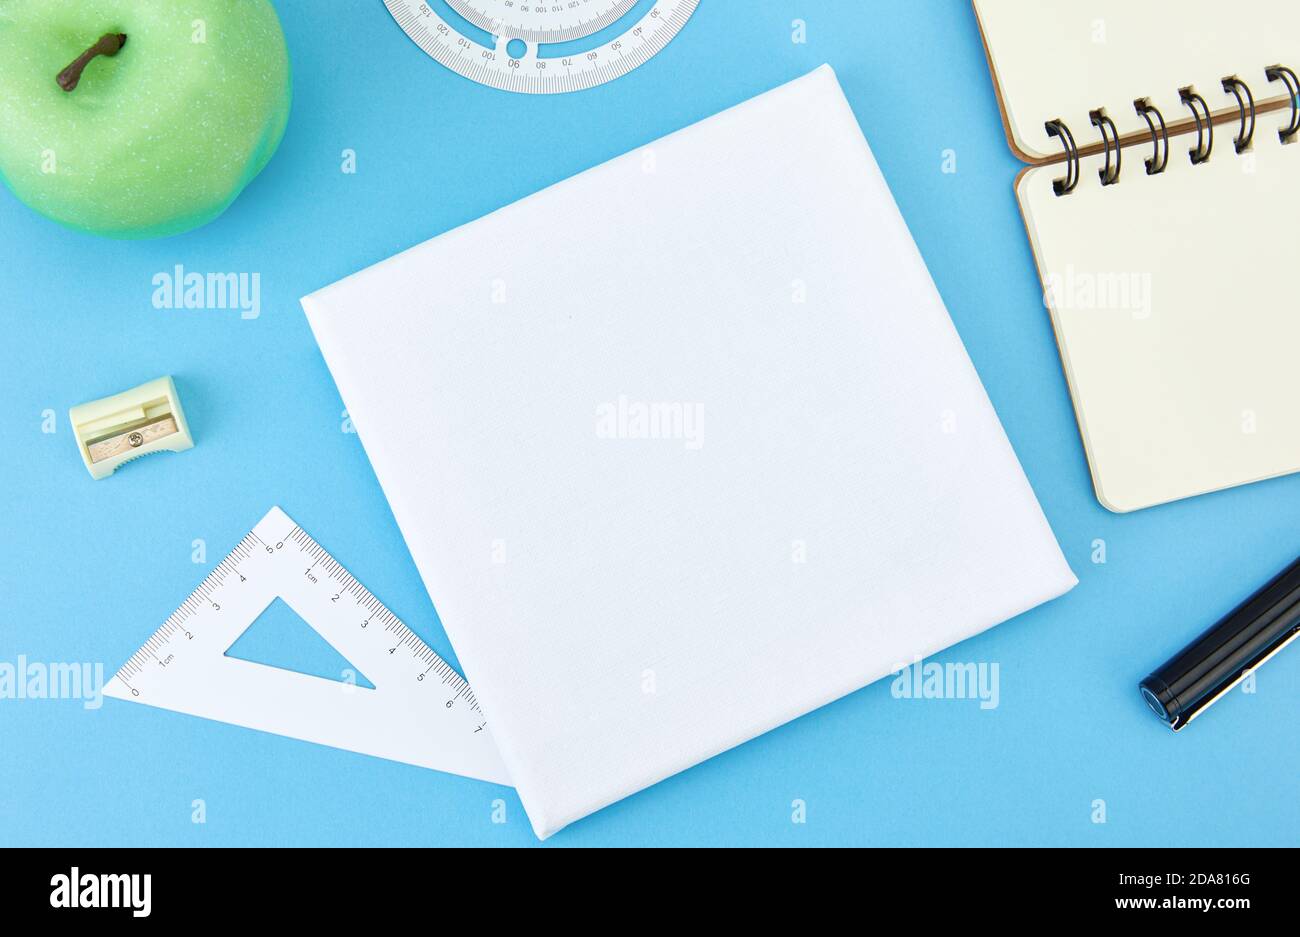 High angle shot of a paper, a notebook, some stationary on a blue surface Stock Photo